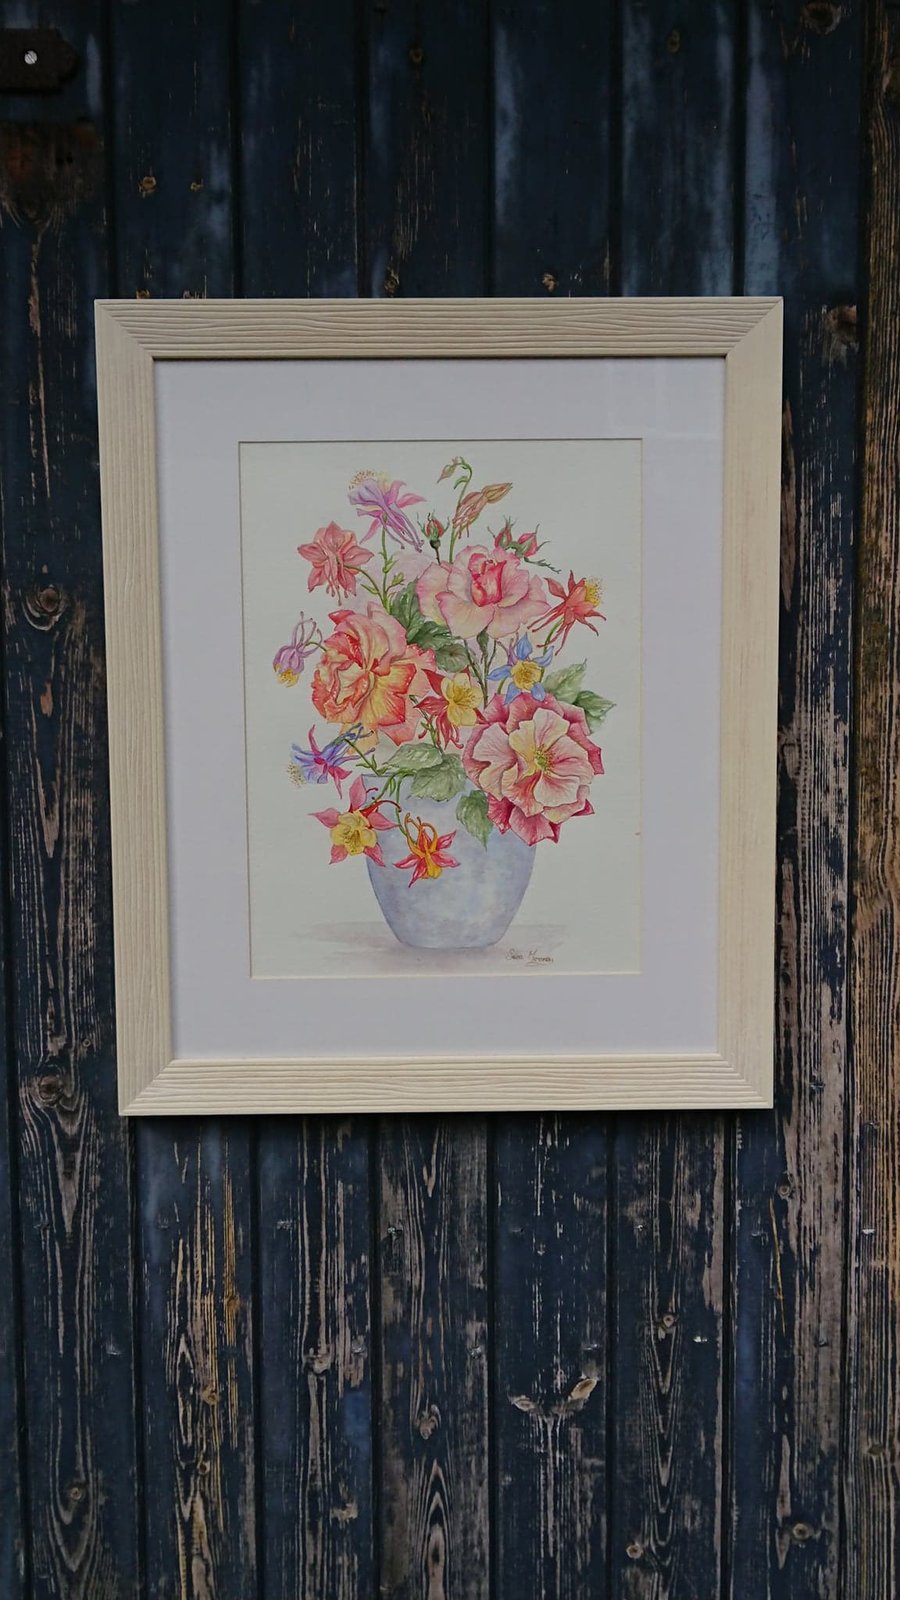 Pink Roses and aquilegia painting in blue pottery vase